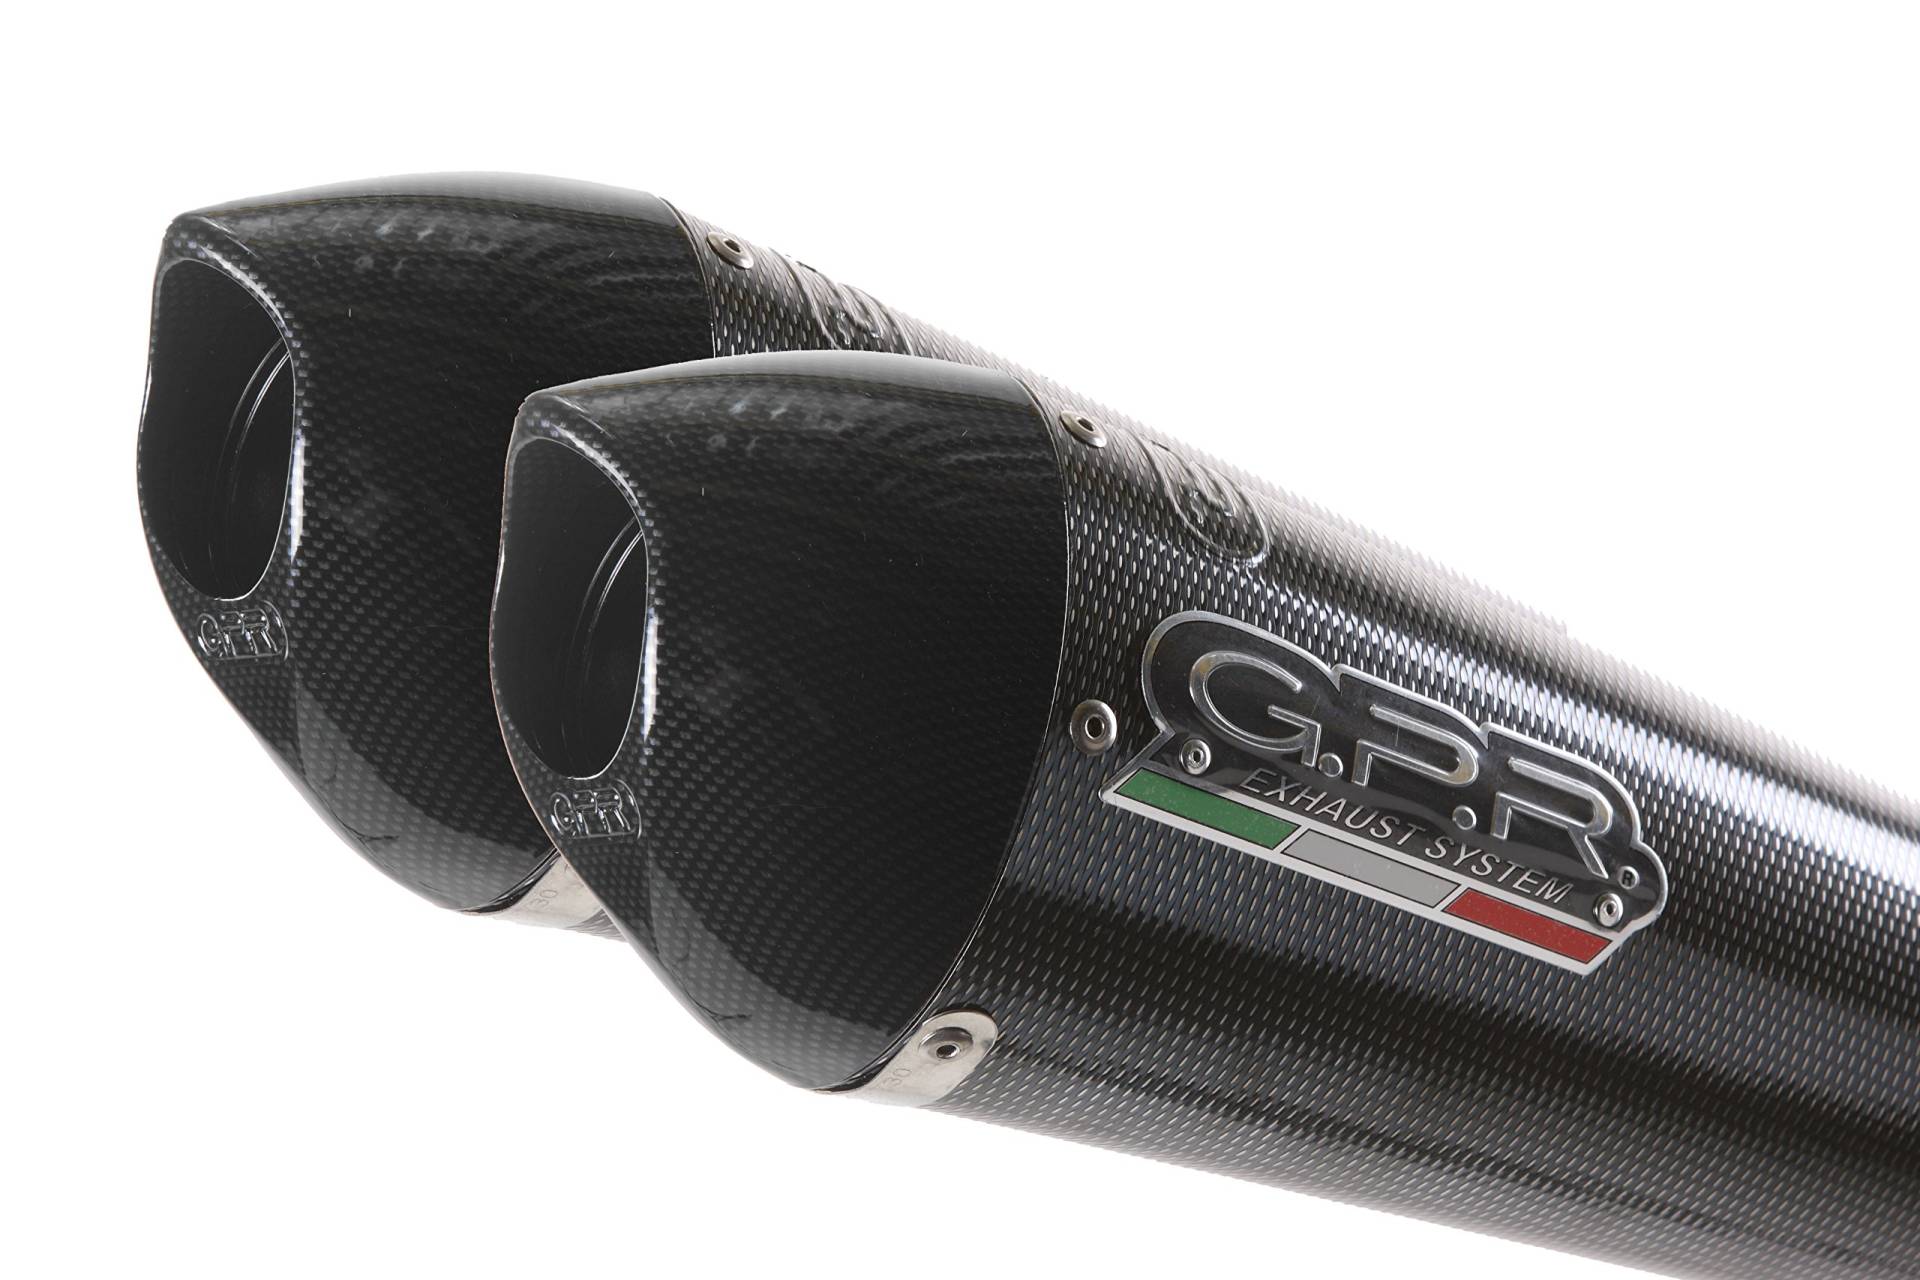 GPR Auspuff Endkappe – Ducati ST4 – ST4 S 1999/05 Dual HOMOLOGATED Slip Exhaust System High Level by GPR Exhaust Systems der EVO Poppy Line von GPR EXHAUST SYSTEM